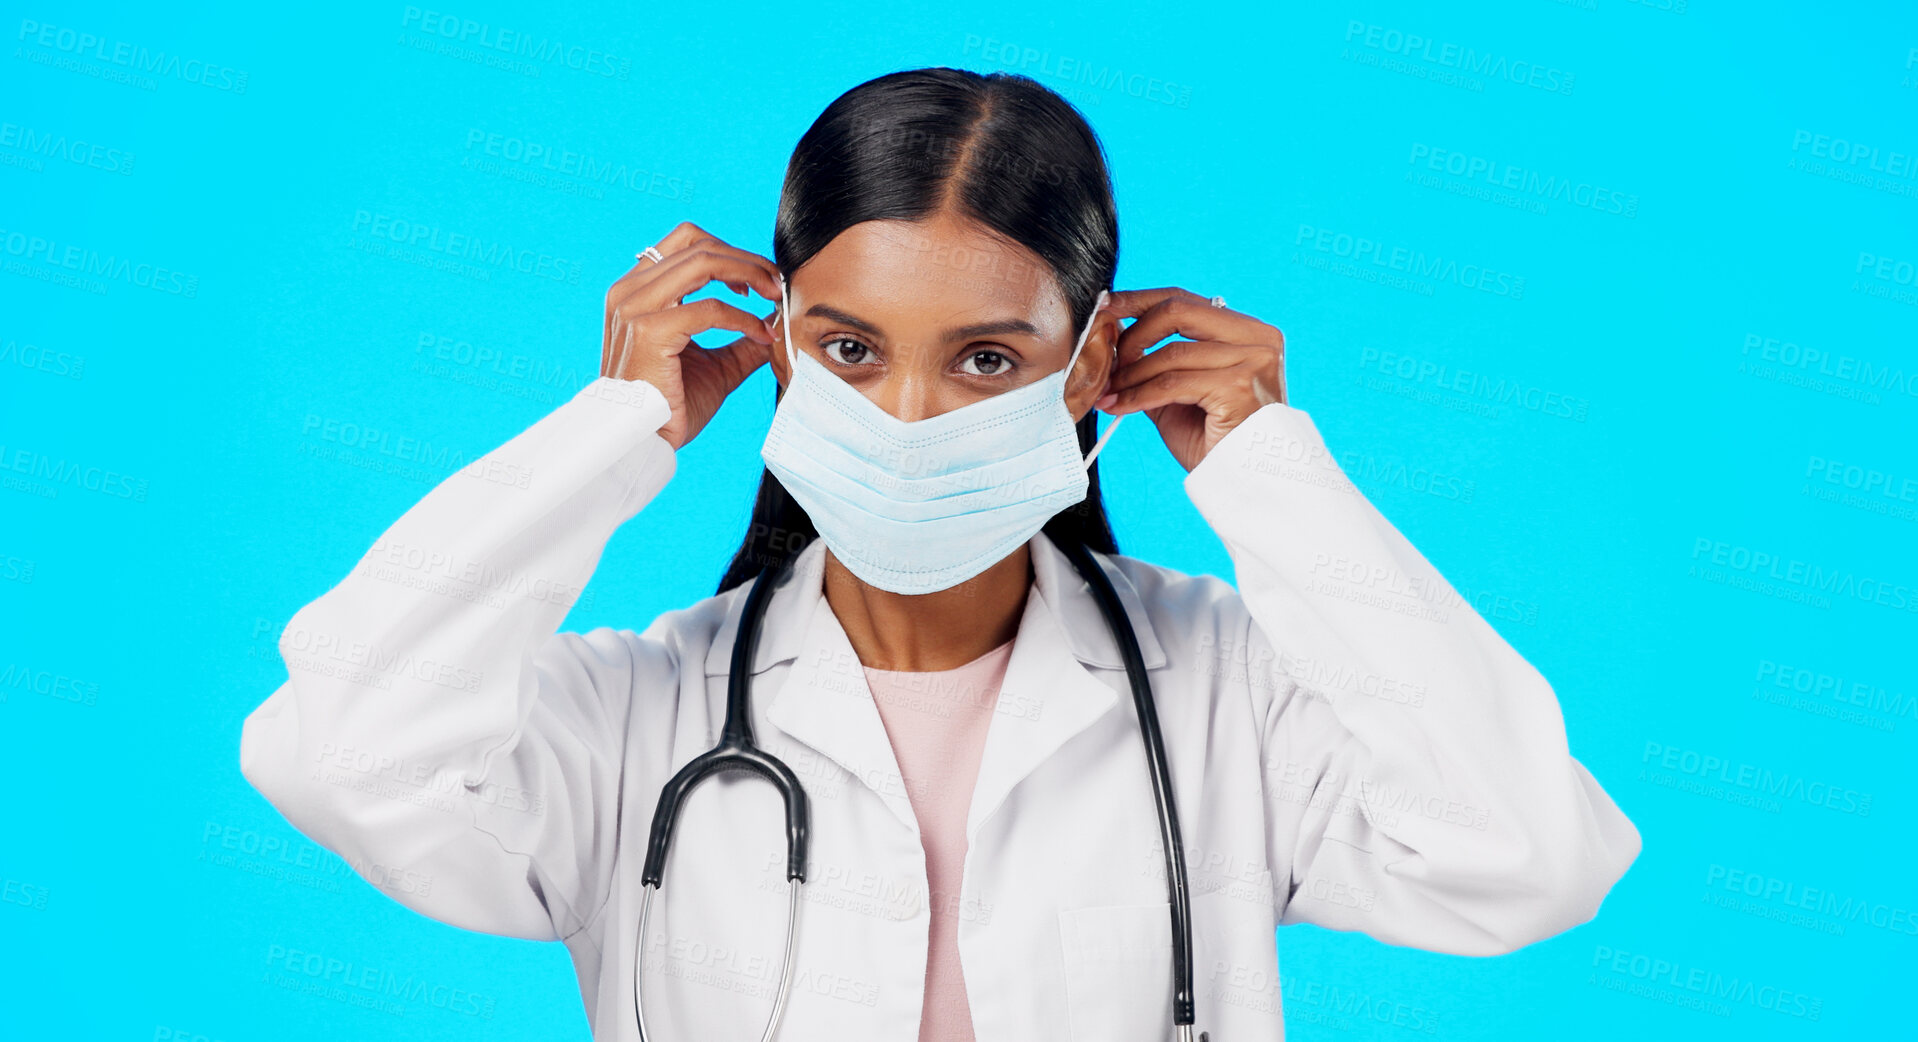 Buy stock photo Studio woman, face mask and covid doctor, female surgeon or nurse for disease support, healthcare or pandemic help. Hospital policy compliance, safety portrait or medical person on blue background